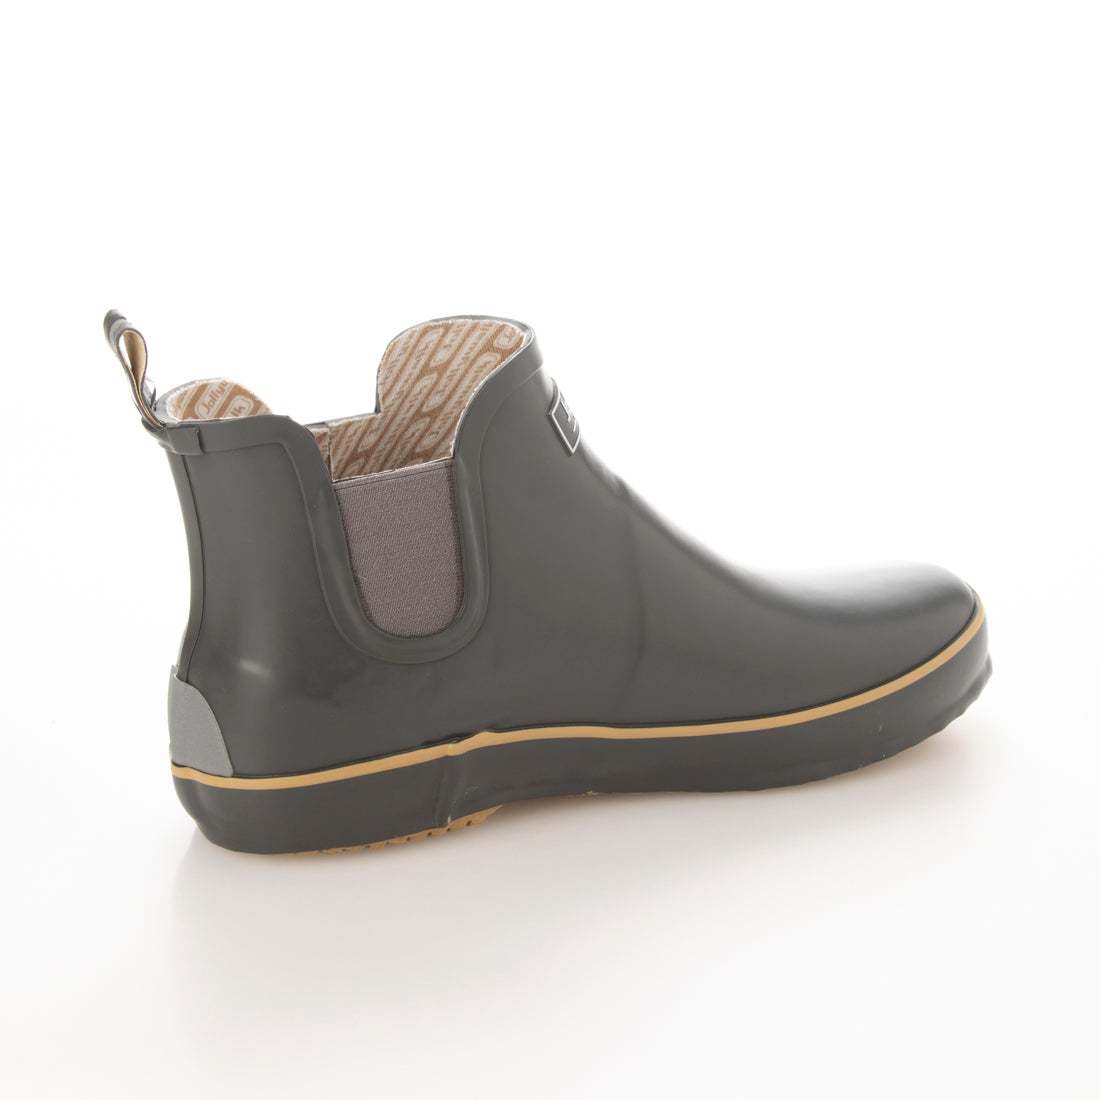  men's rain boots rain shoes boots rain shoes natural rubber material new goods [20088-GRY-270]27.0cm stock one . sale 